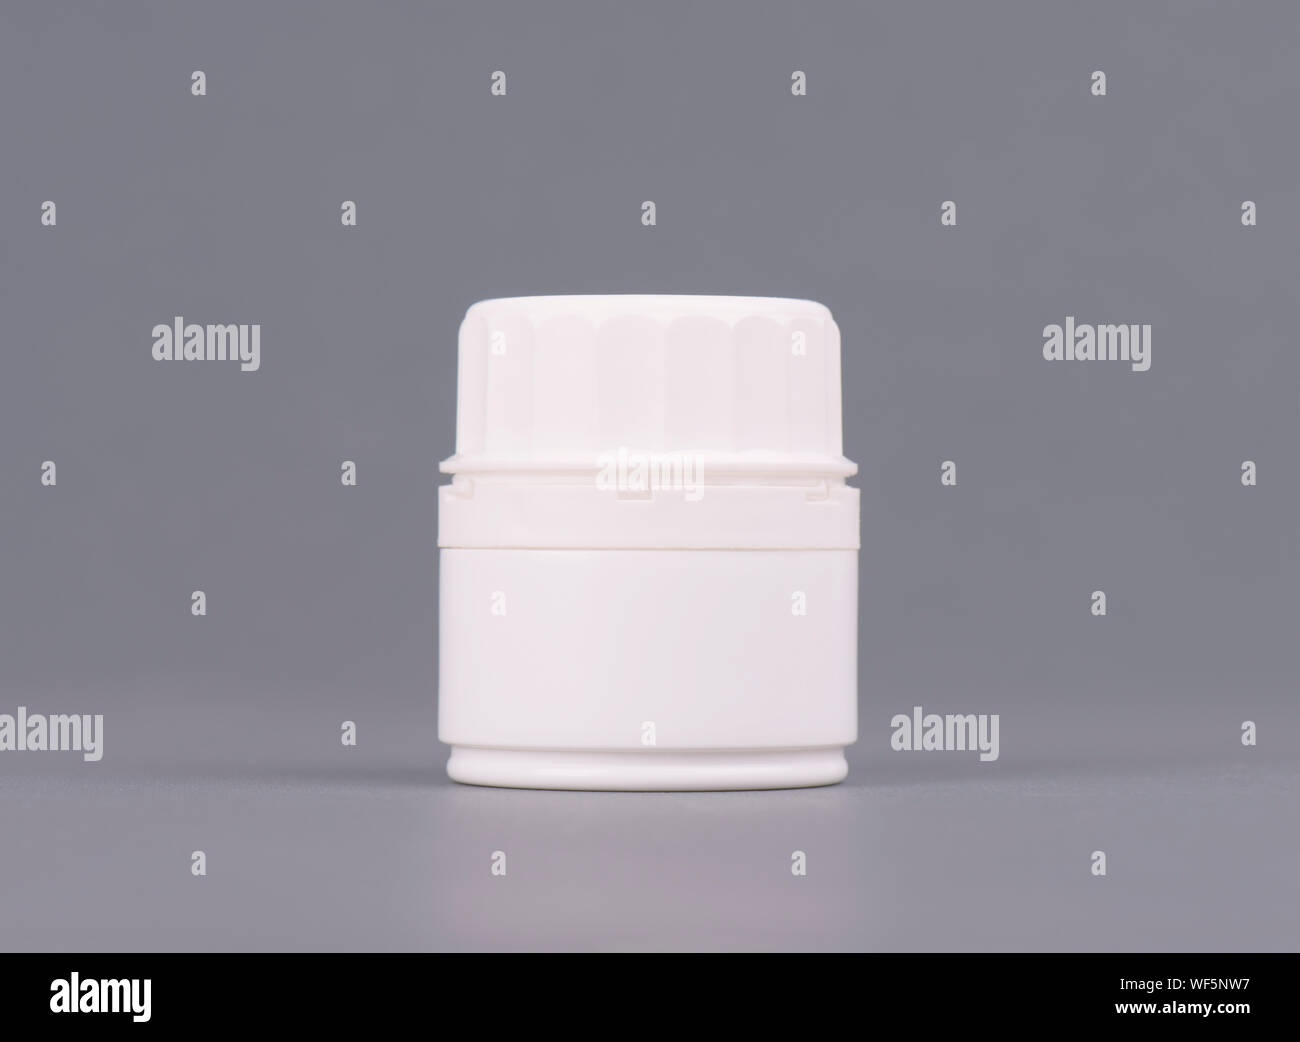 Blank medium size medicine white plastic packaging bottles for cosmetics, vitamins, pills or capsules. Packaging on gray background Stock Photo